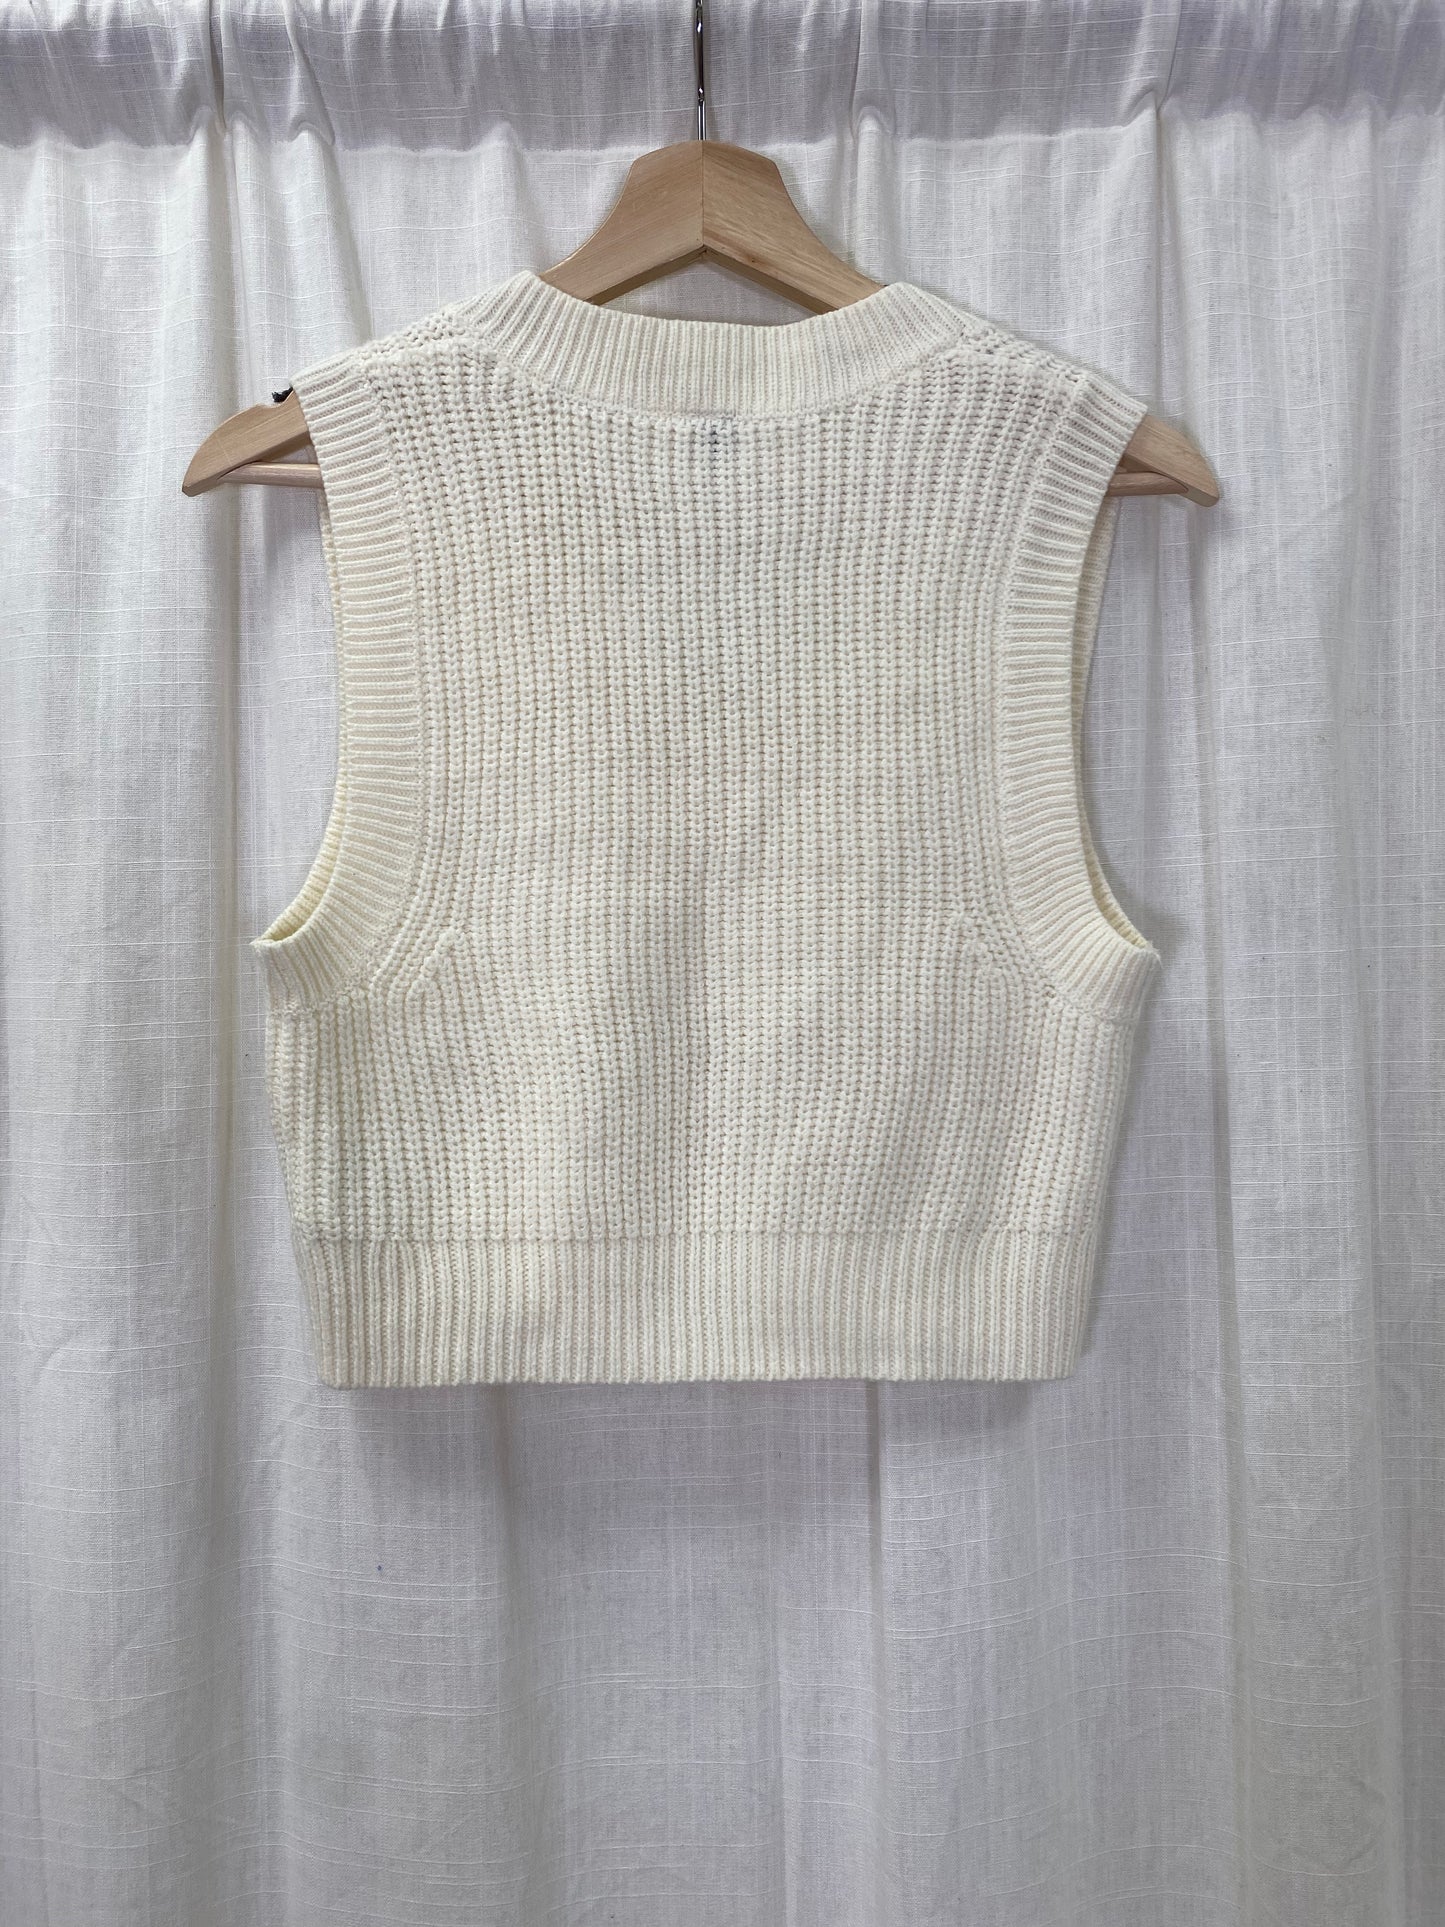 H&M Cropped Sweater Vest (XS)